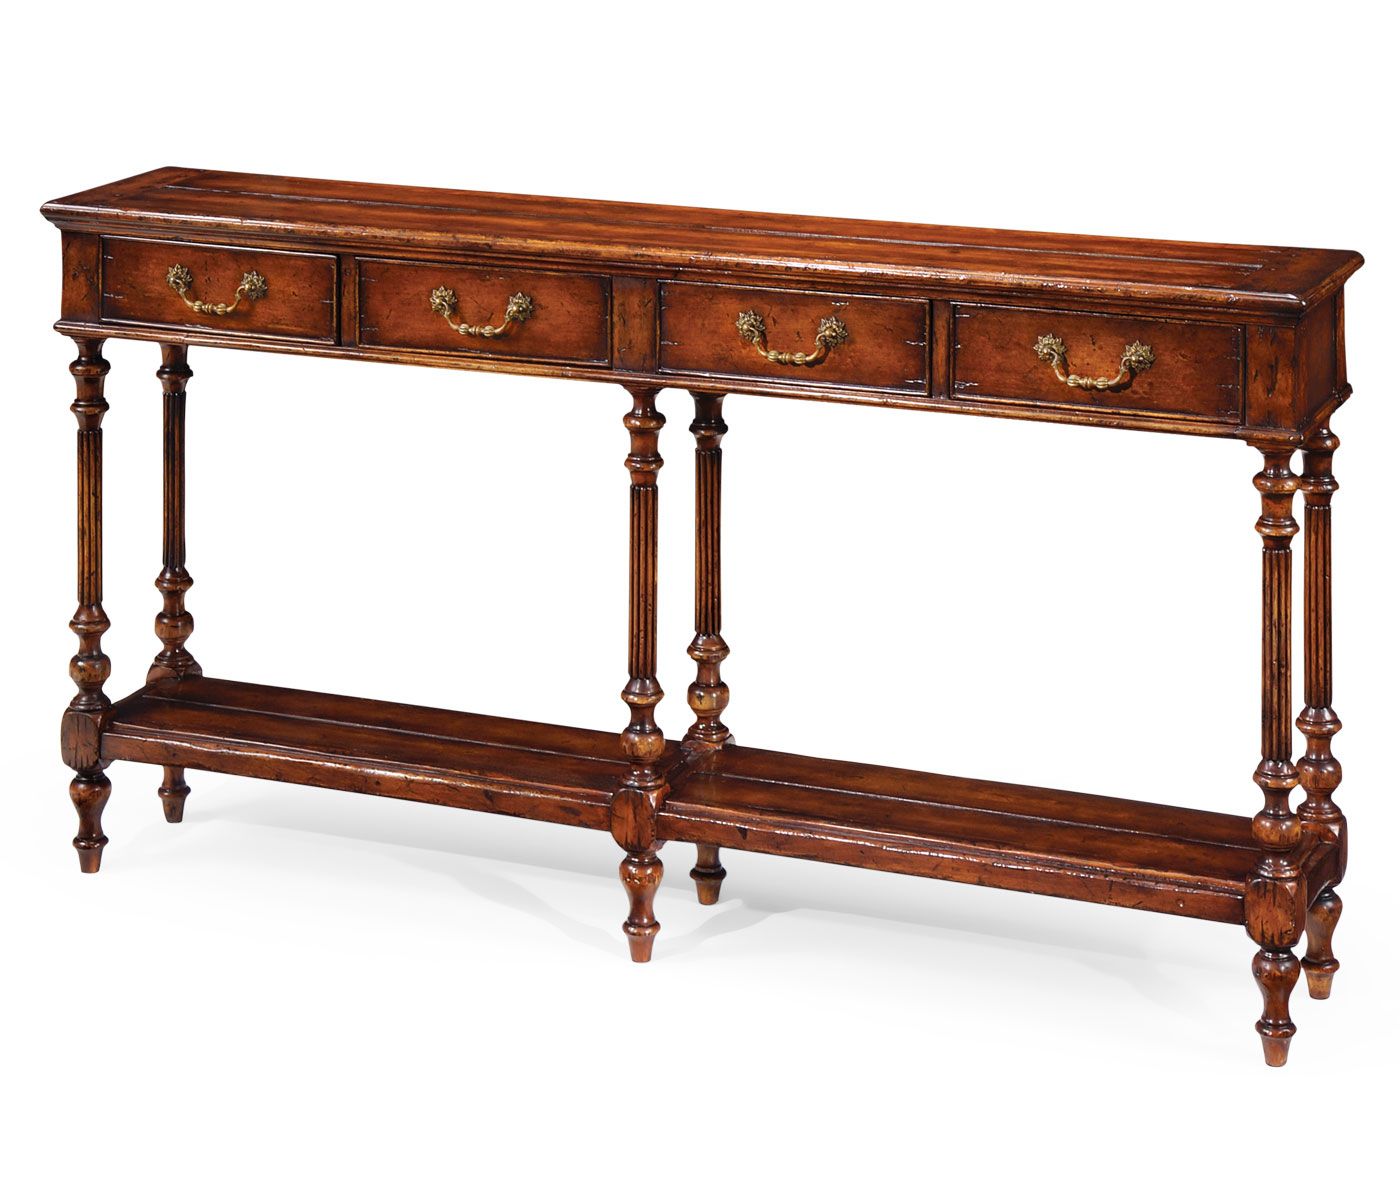 Antique Console Tables Pertaining To 2020 Narrow Walnut Console Antique Finish (View 7 of 10)